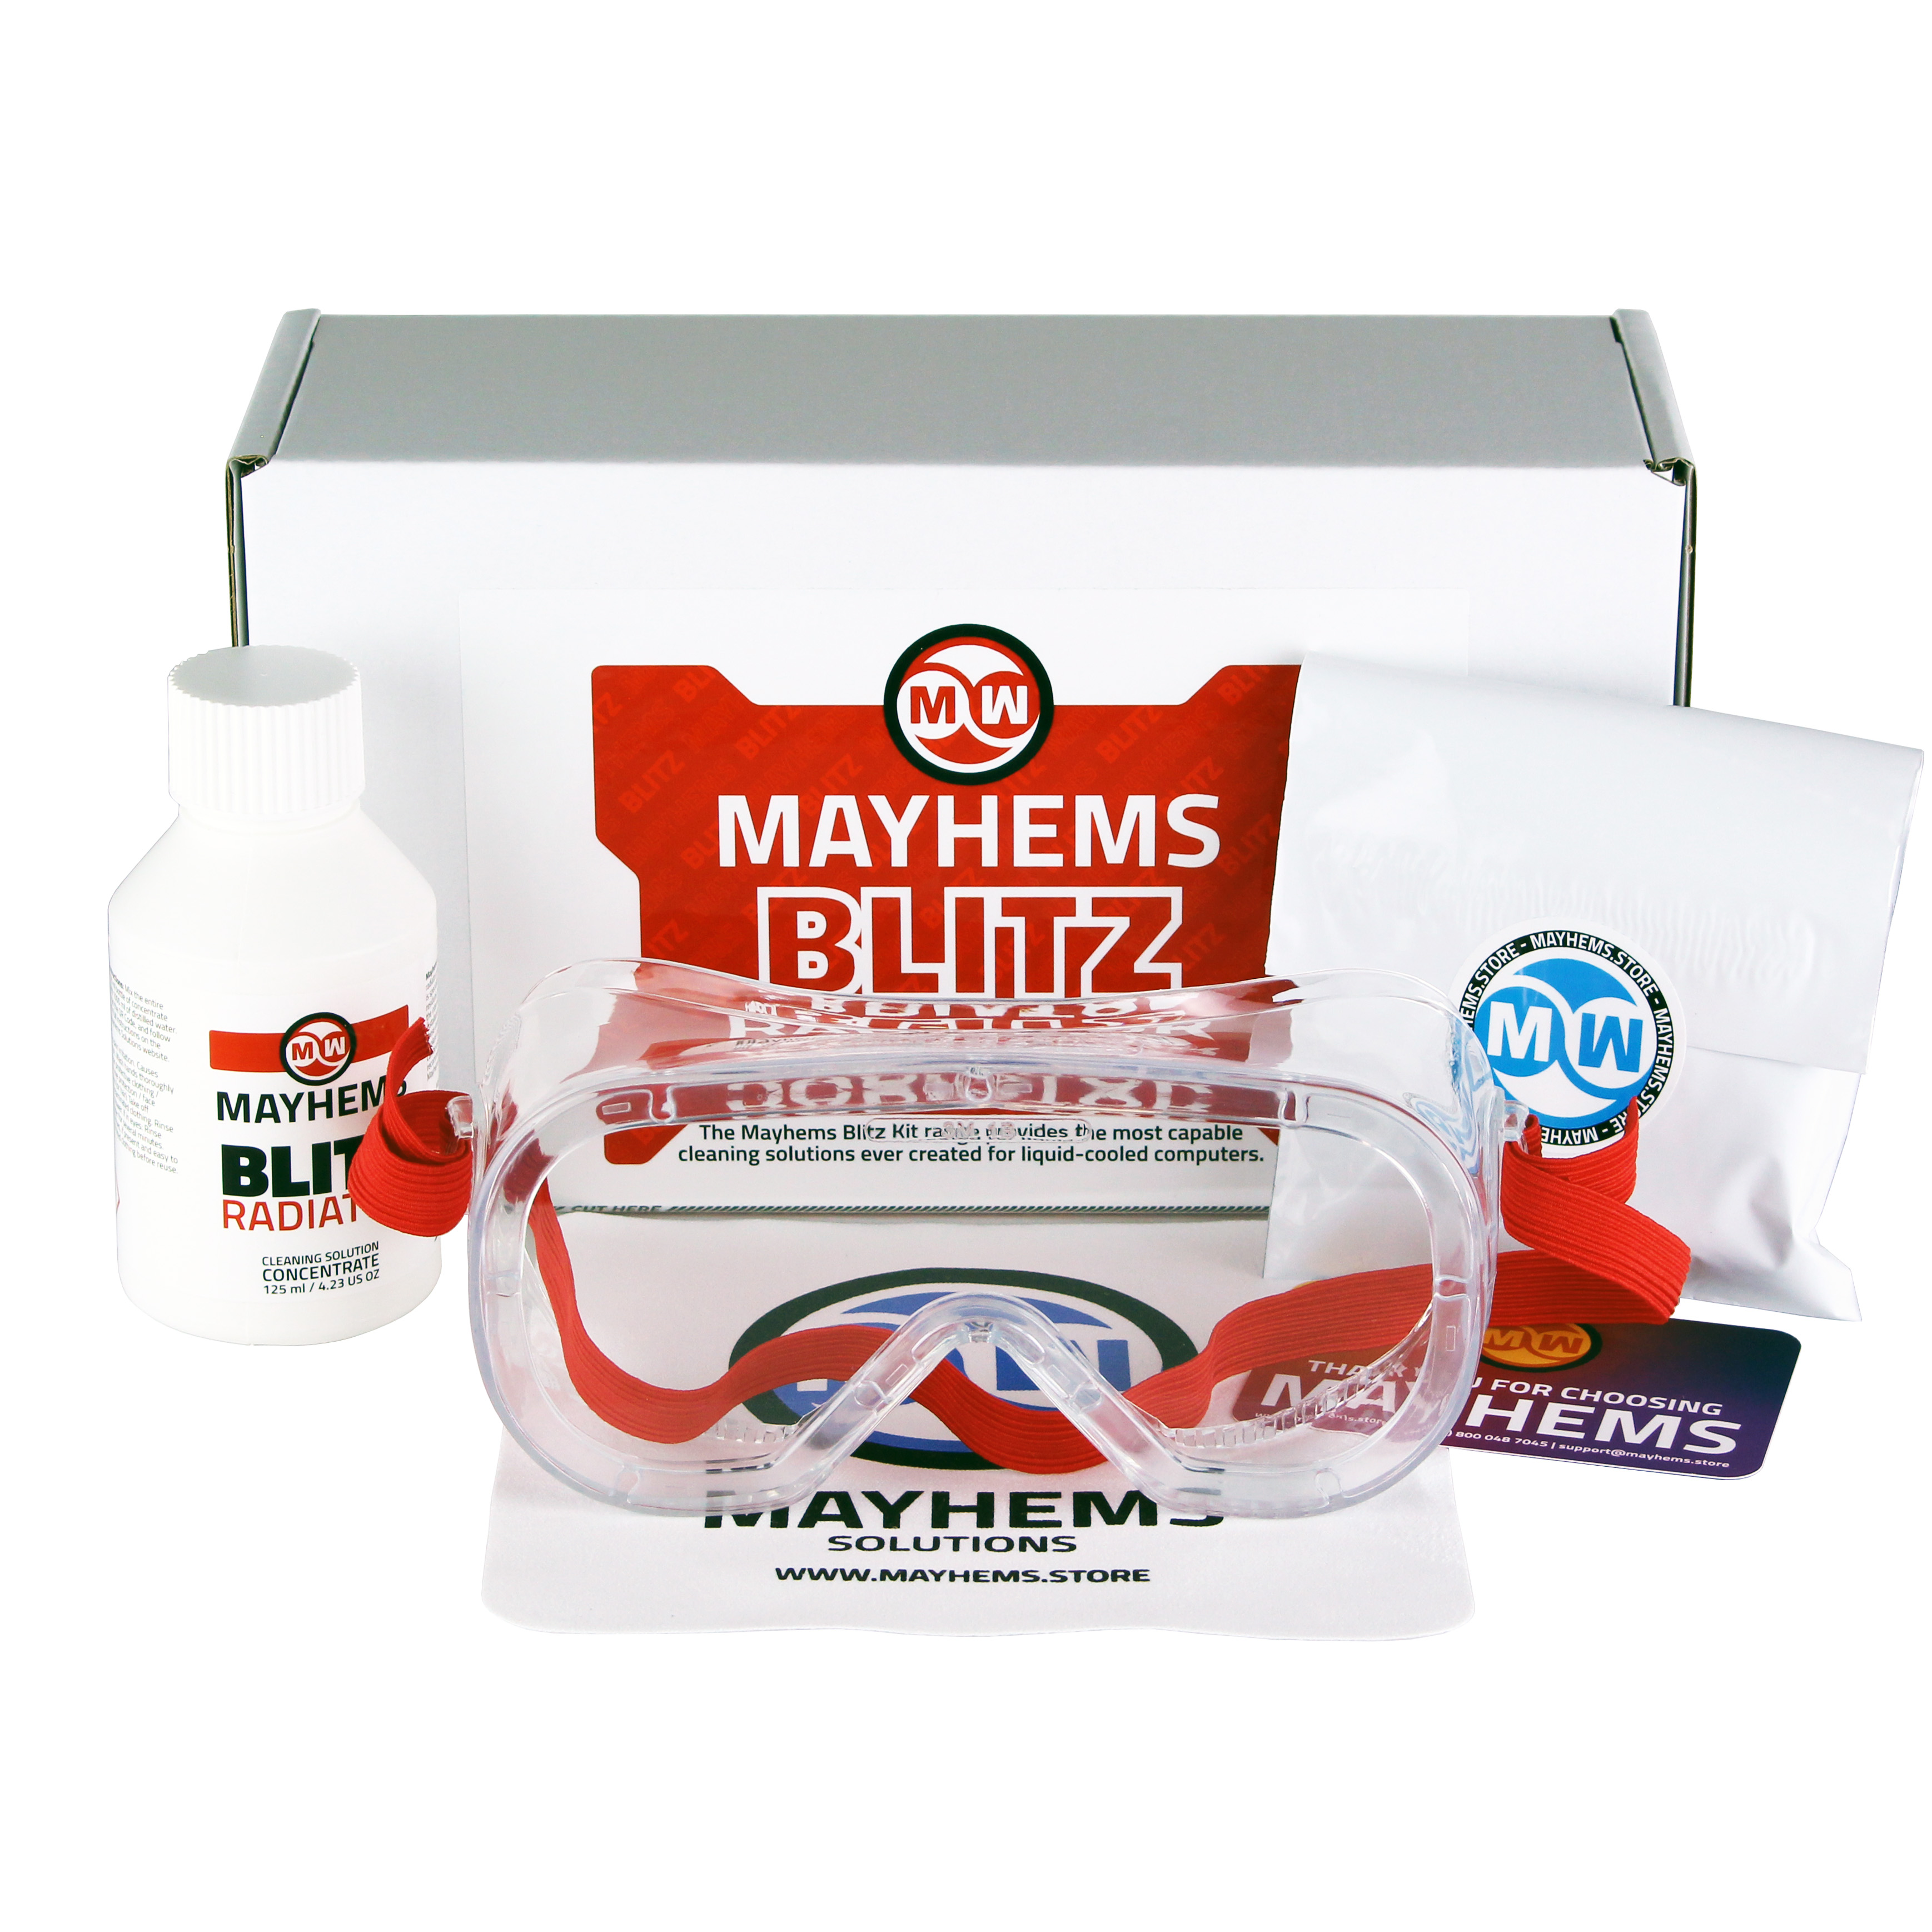 Mayhems - PC Cleaning Kit - Blitz Radiator - Radiator Cleaning, For Initial Setup and Coolant Change